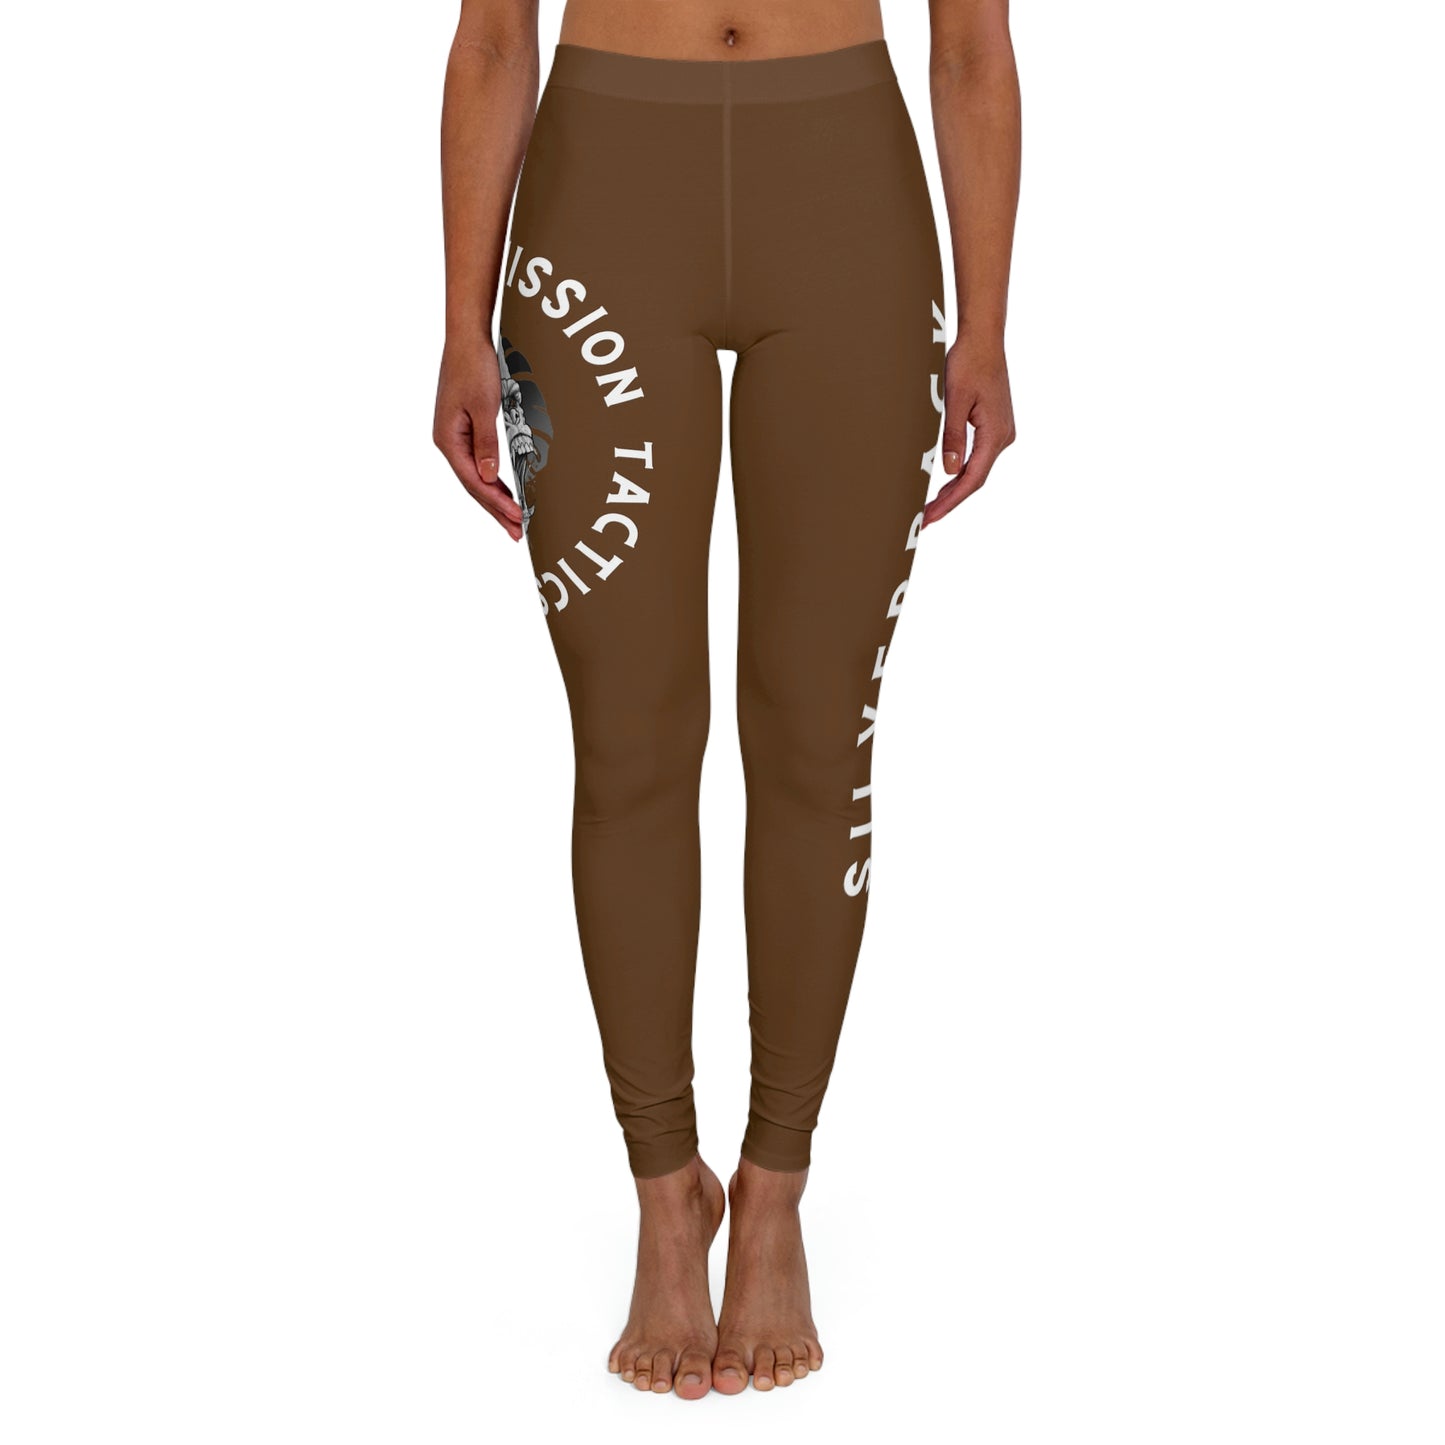 Women's Ranked Silverback Submission Tactics Spandex Leggings